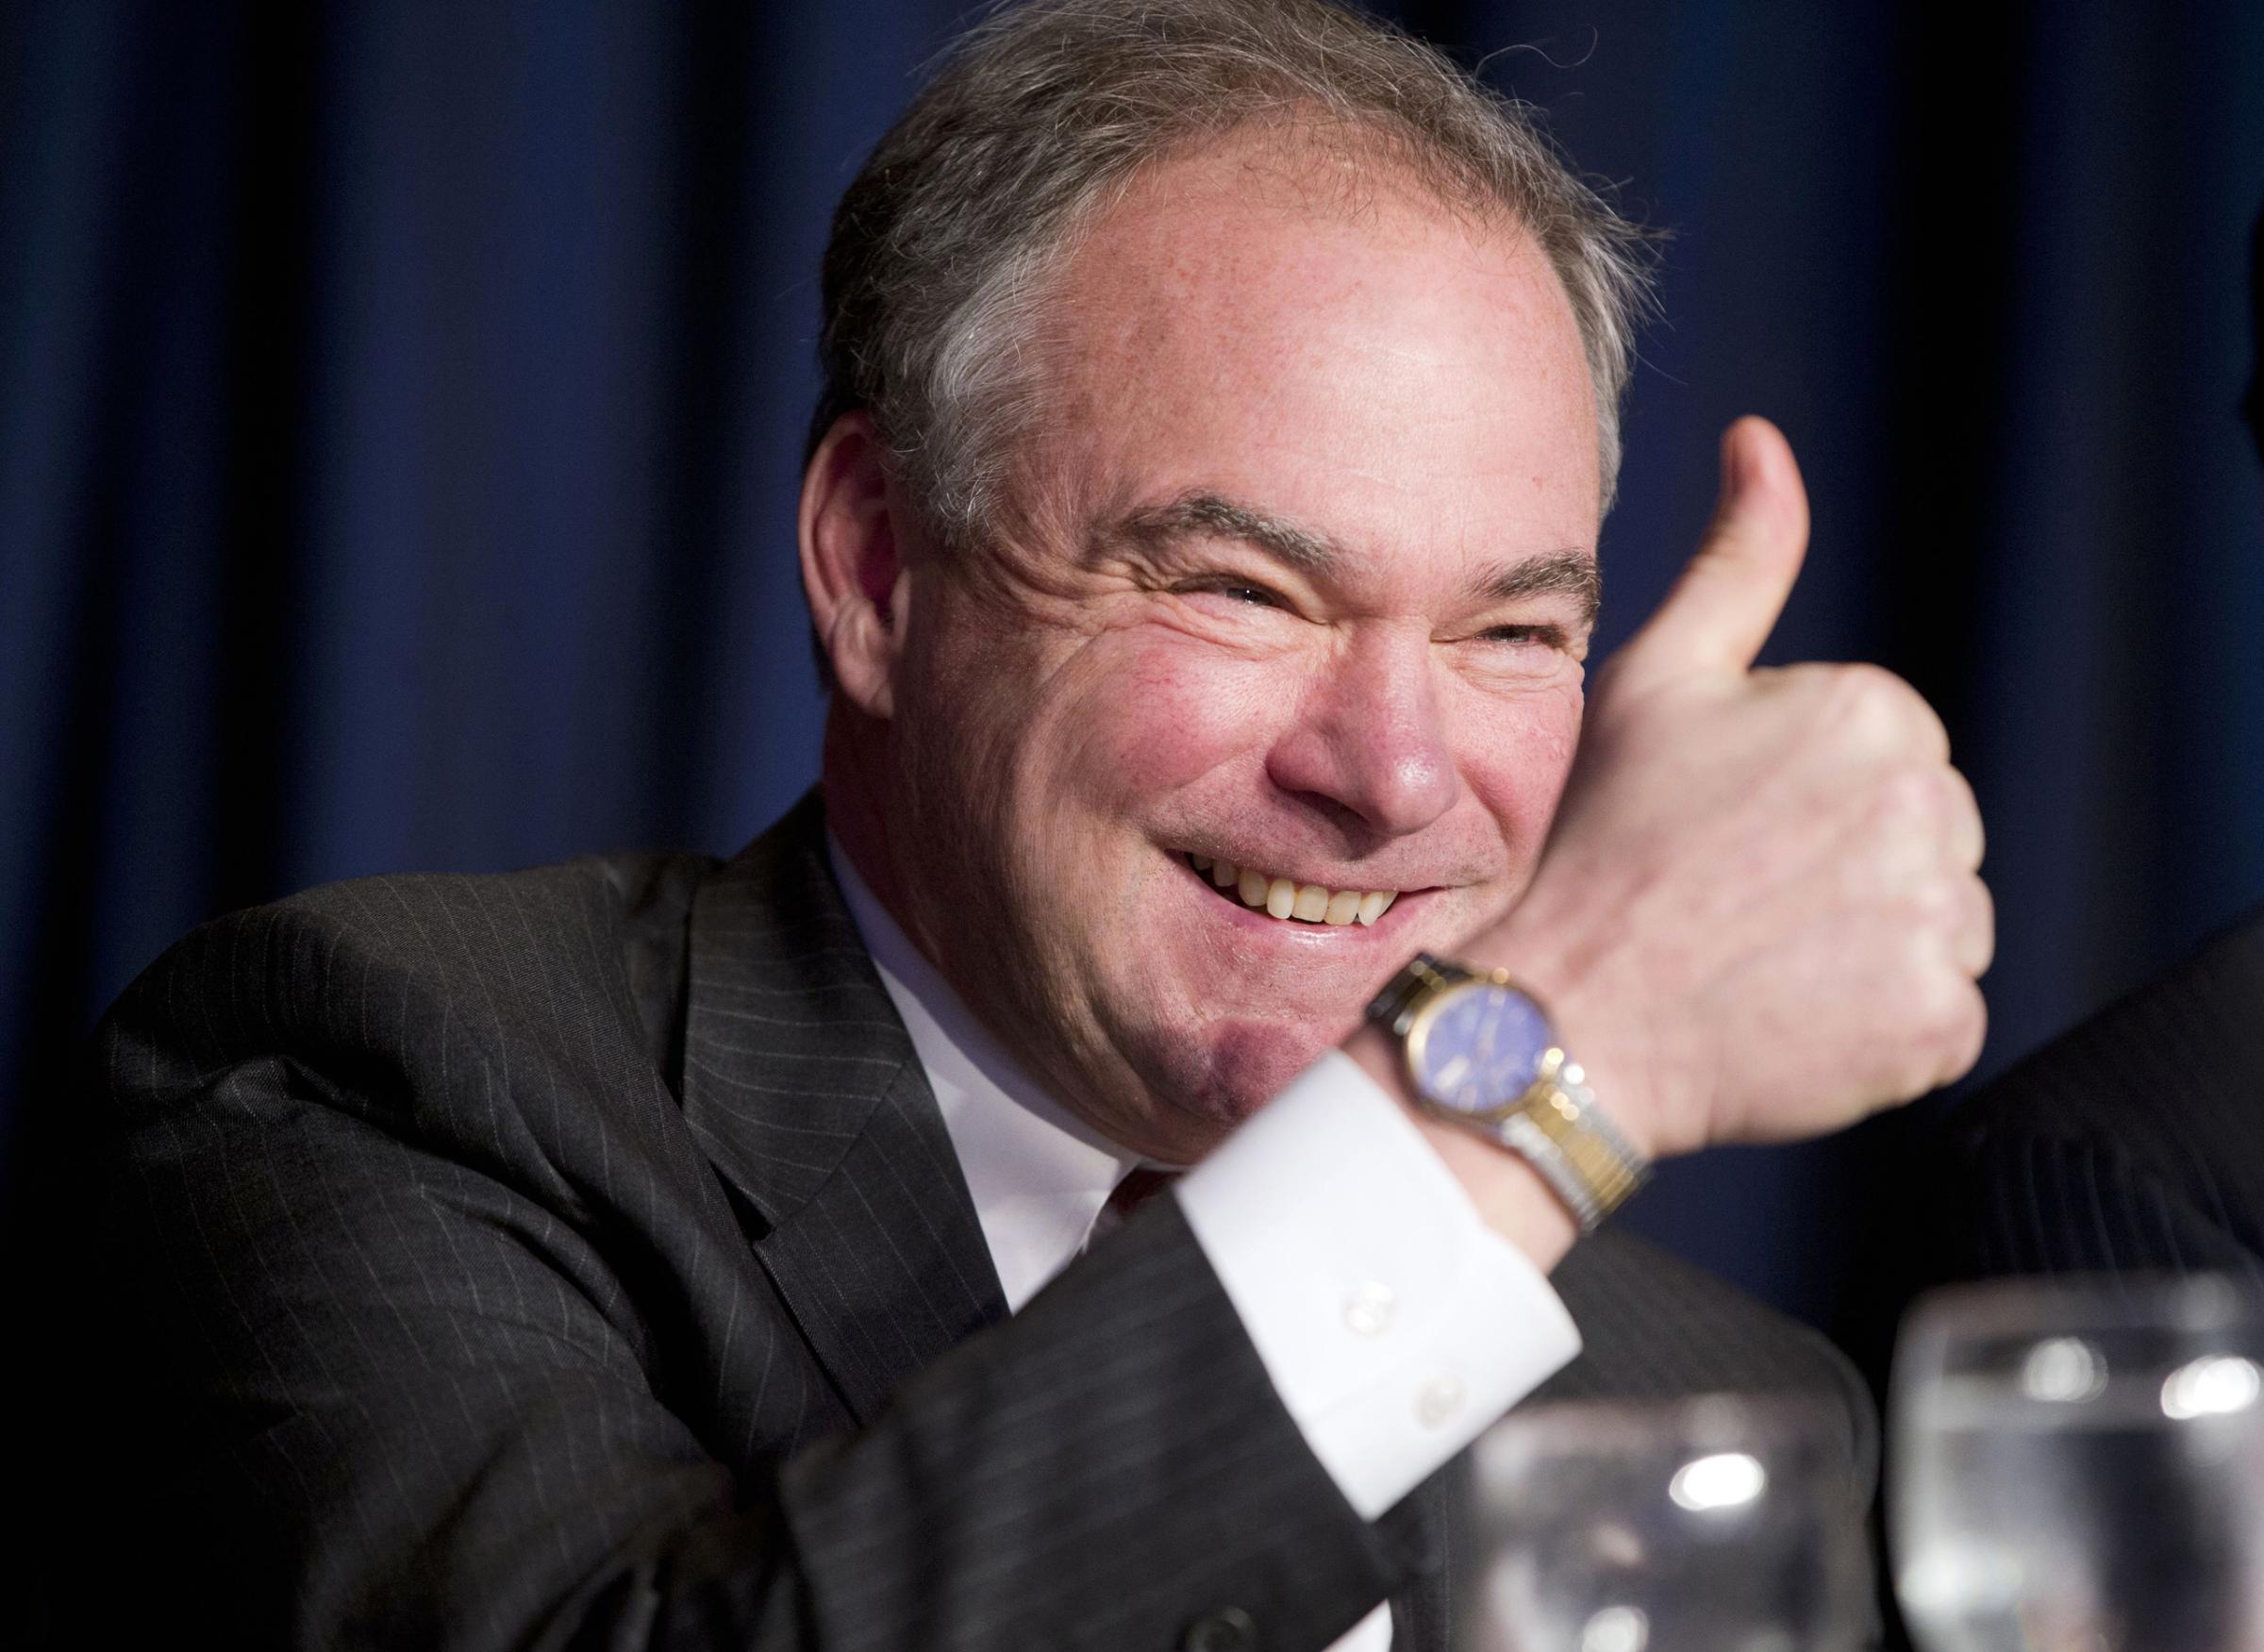 Sen. Tim Kaine gives a 'thumbs-up' as he takes his seat at the head table for the National Prayer Breakfast in Washington, D.C. on Feb. 4, 2016.